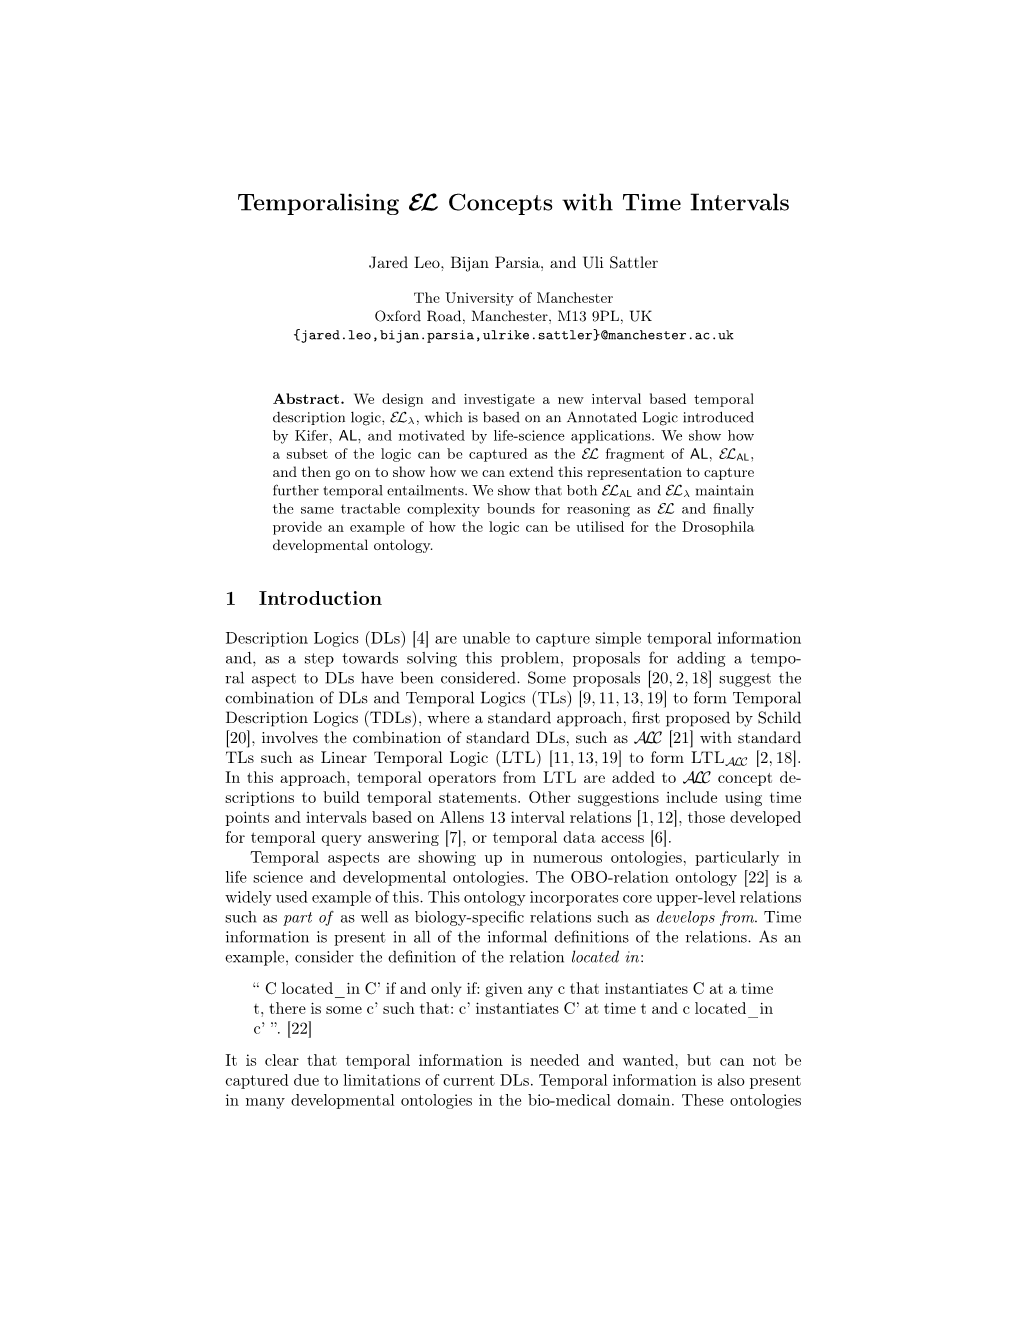 Temporalising EL Concepts with Time Intervals